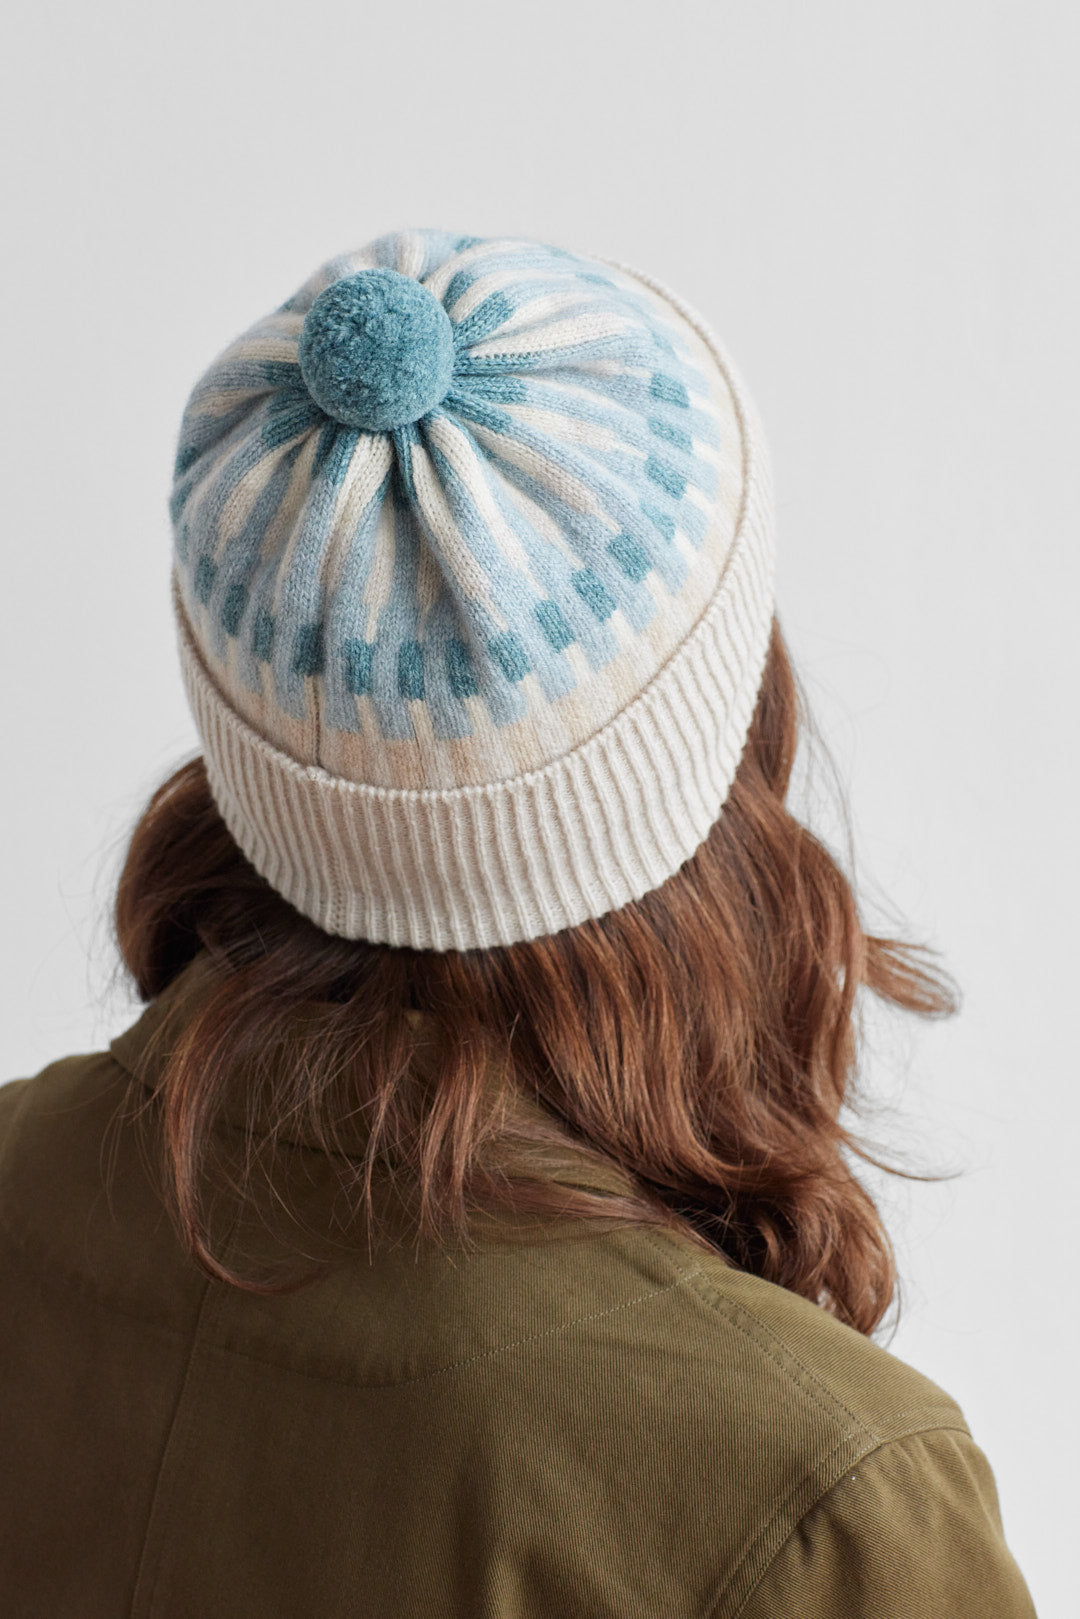 Pom Hat "Harbour" - North Sea & Oatmeal